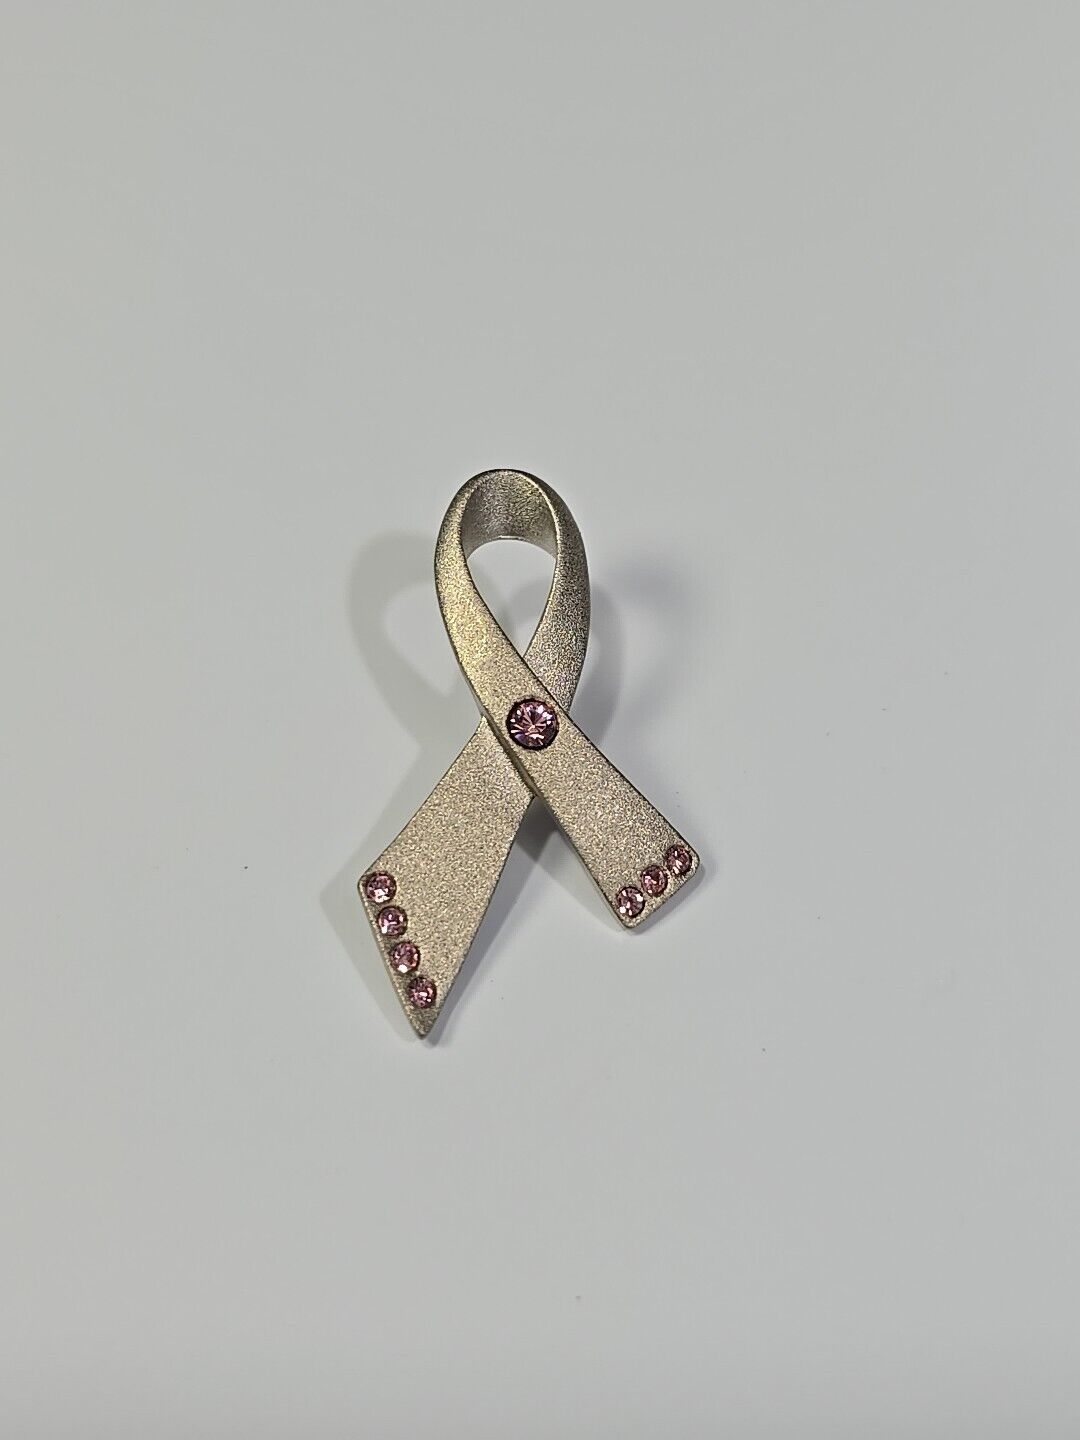 Avon Lapel Pin Silver Ribbon With Faux Pink Jewels Cancer Awareness 